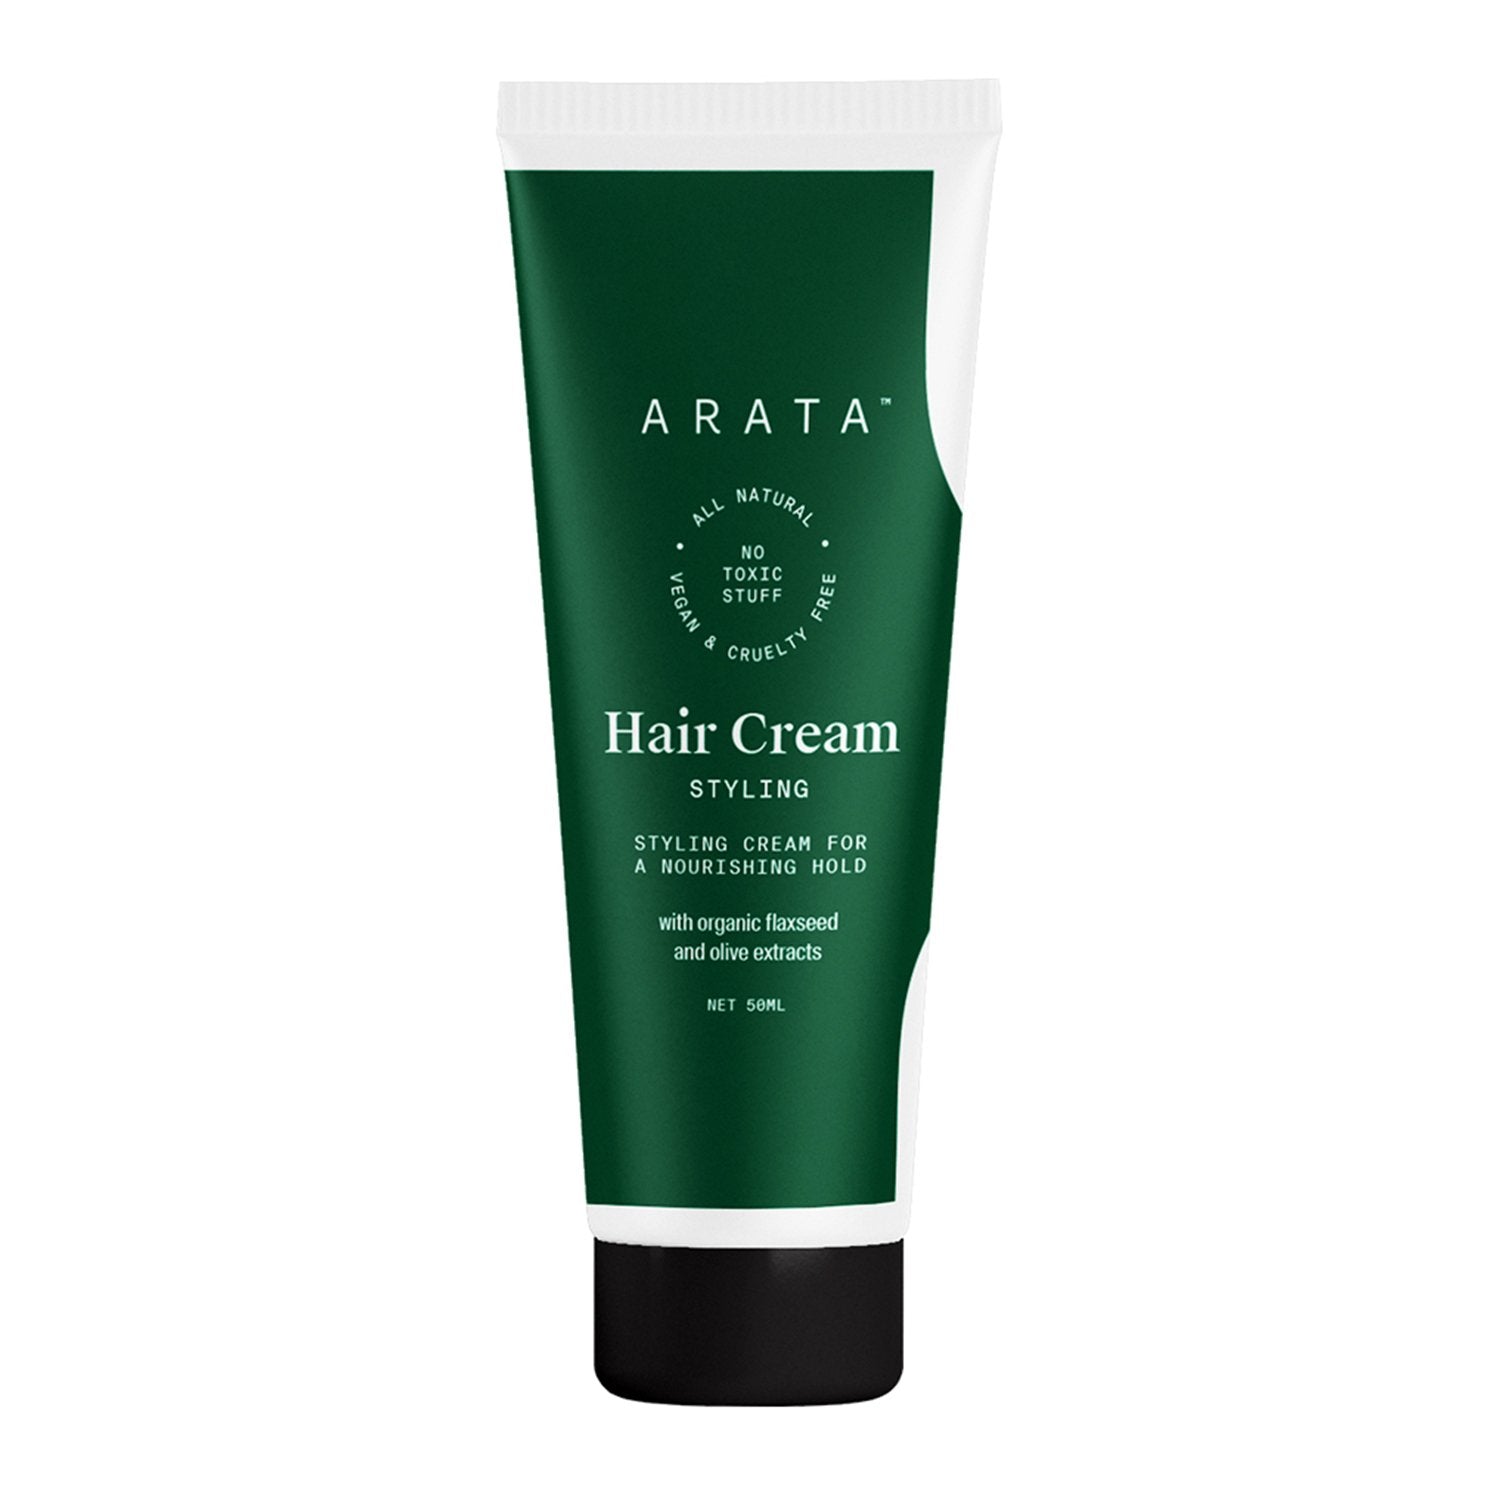 Arata Natural Styling & Hold Hair Cream | All-Natural, Vegan & Cruelty-Free | Styling & Hair Growth Formula 50g